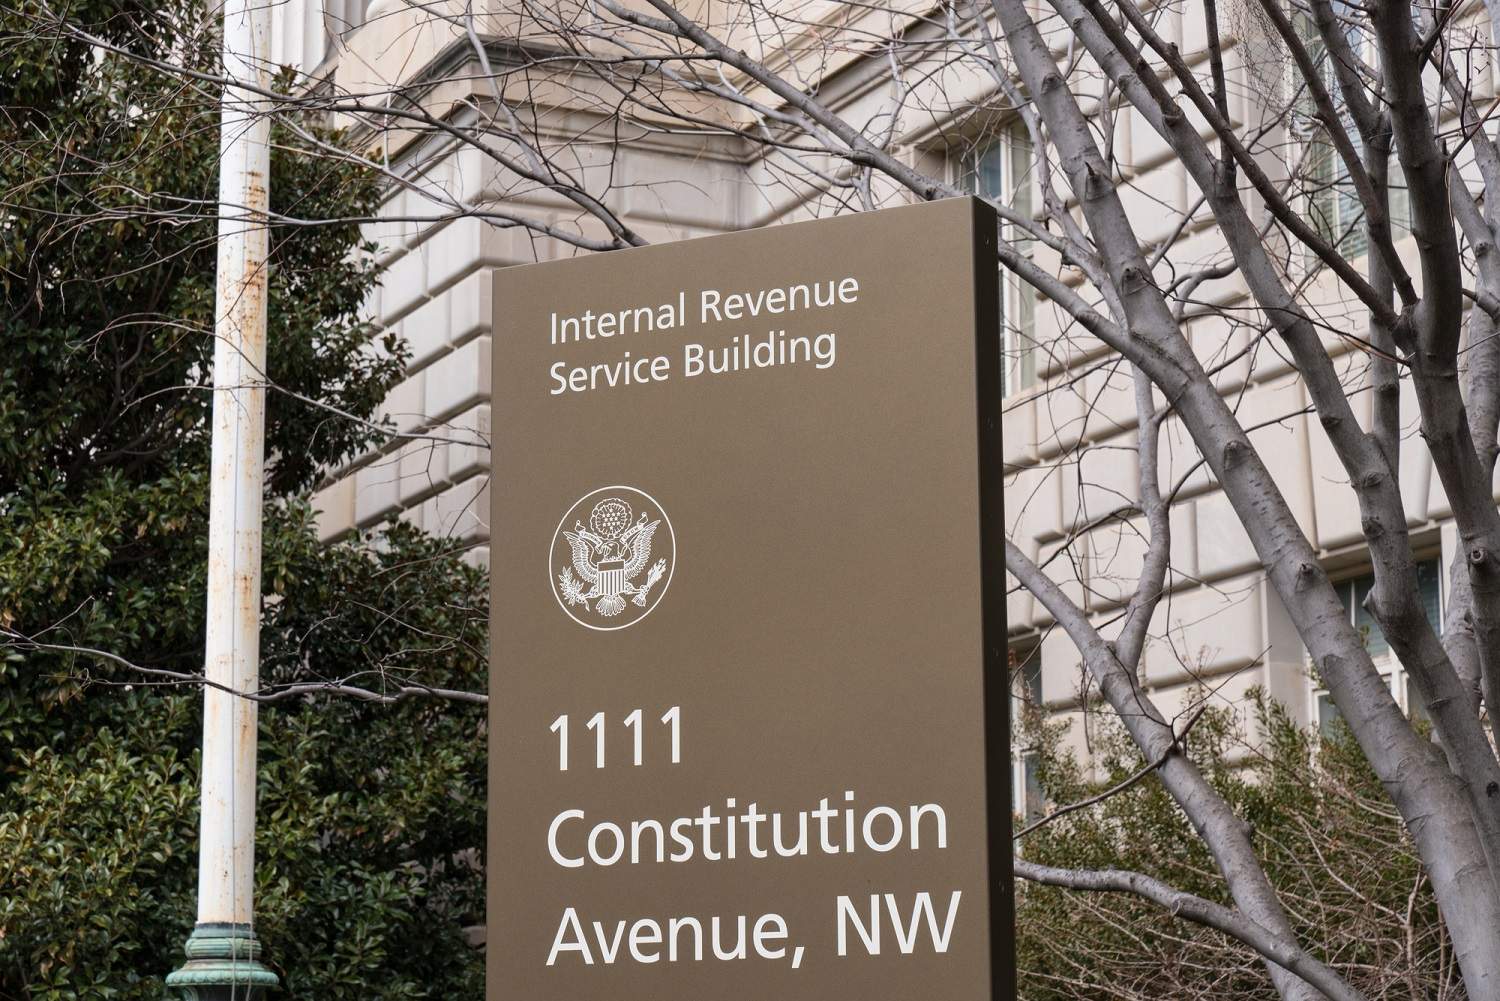 IRS Announces Delay in Form 1099-K Reporting Threshold